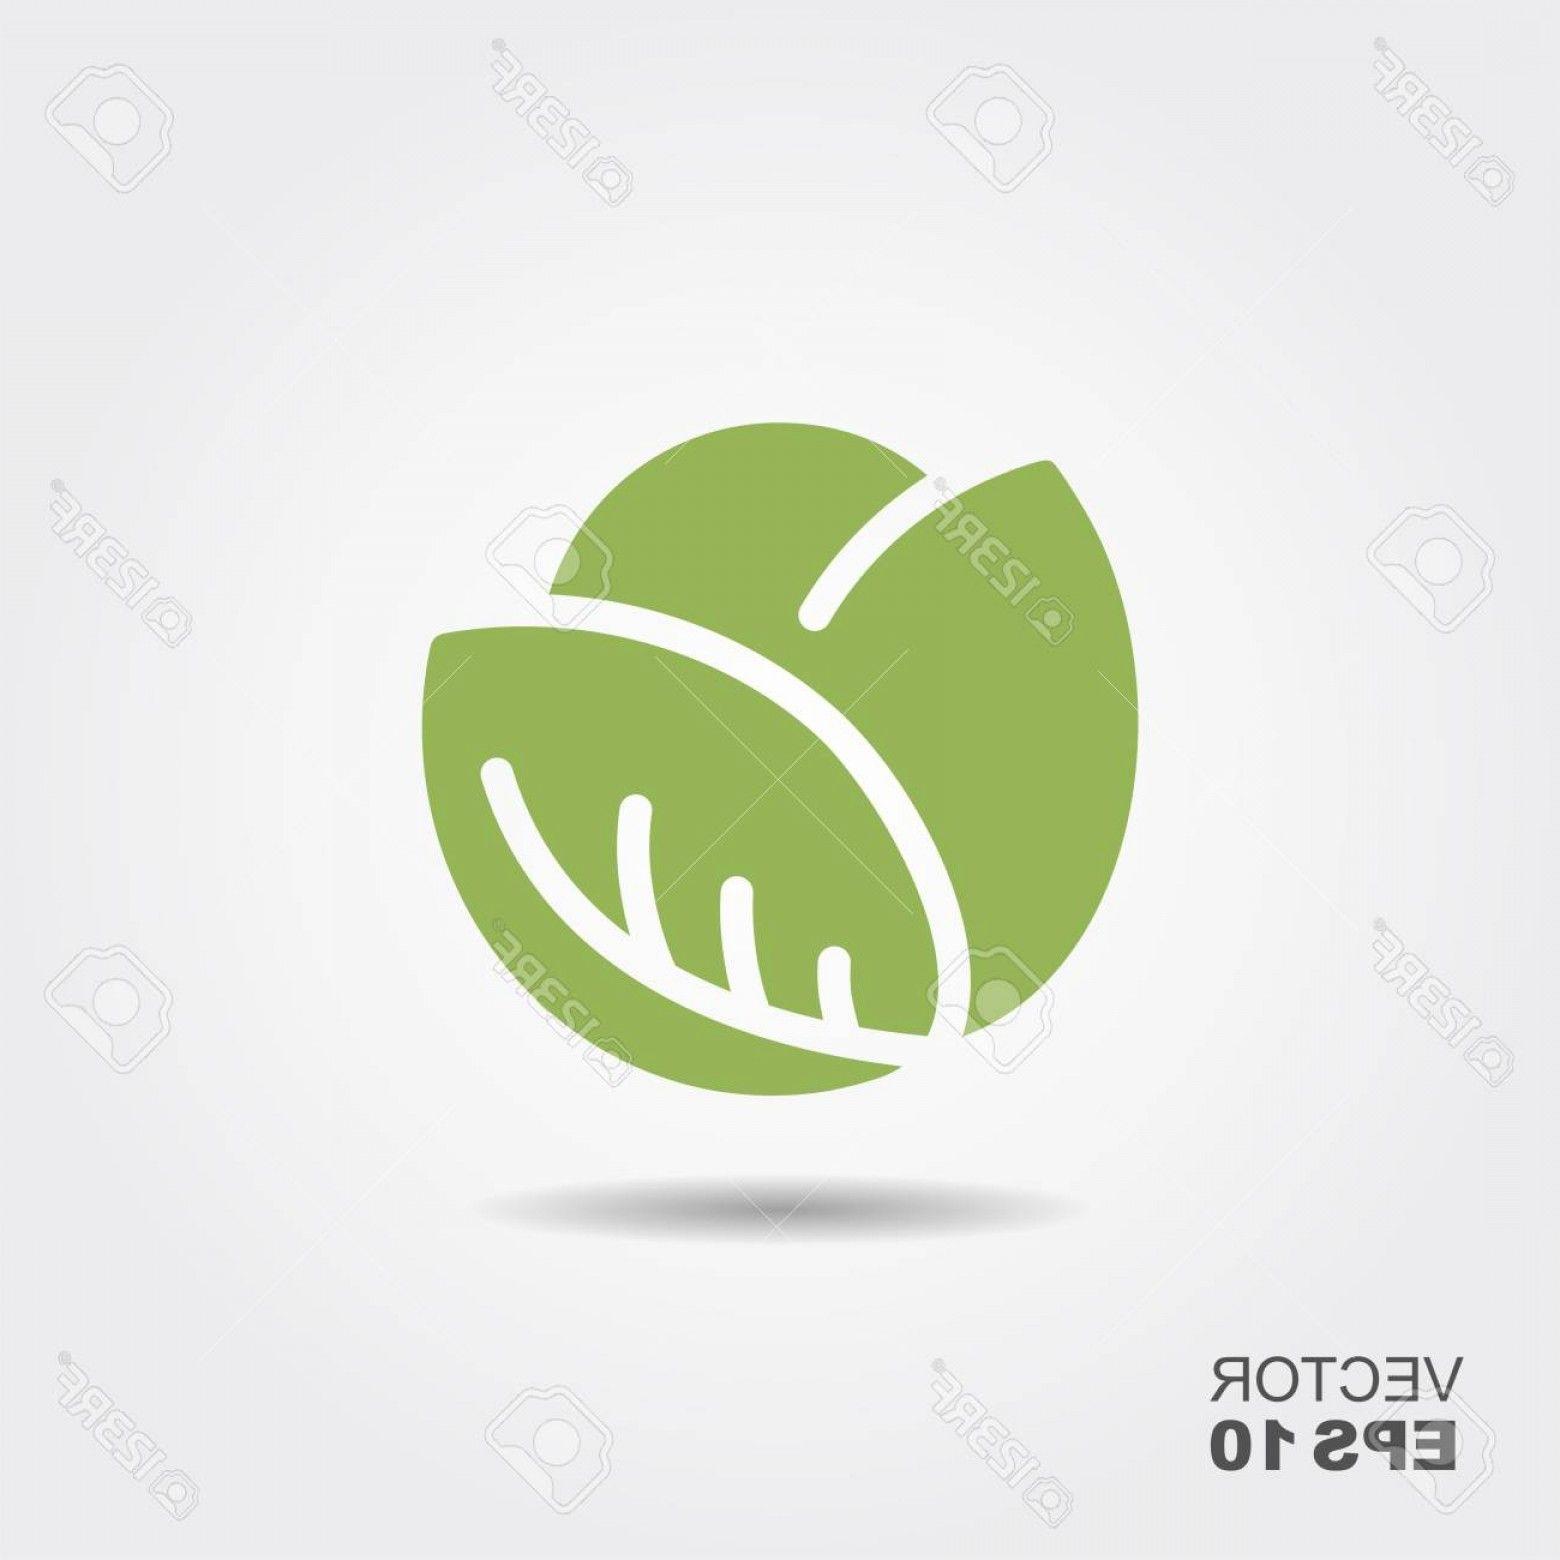 Cabbage Logo - Photostock Vector Cabbage Icon In Flat Style Isolated Object Cabbage